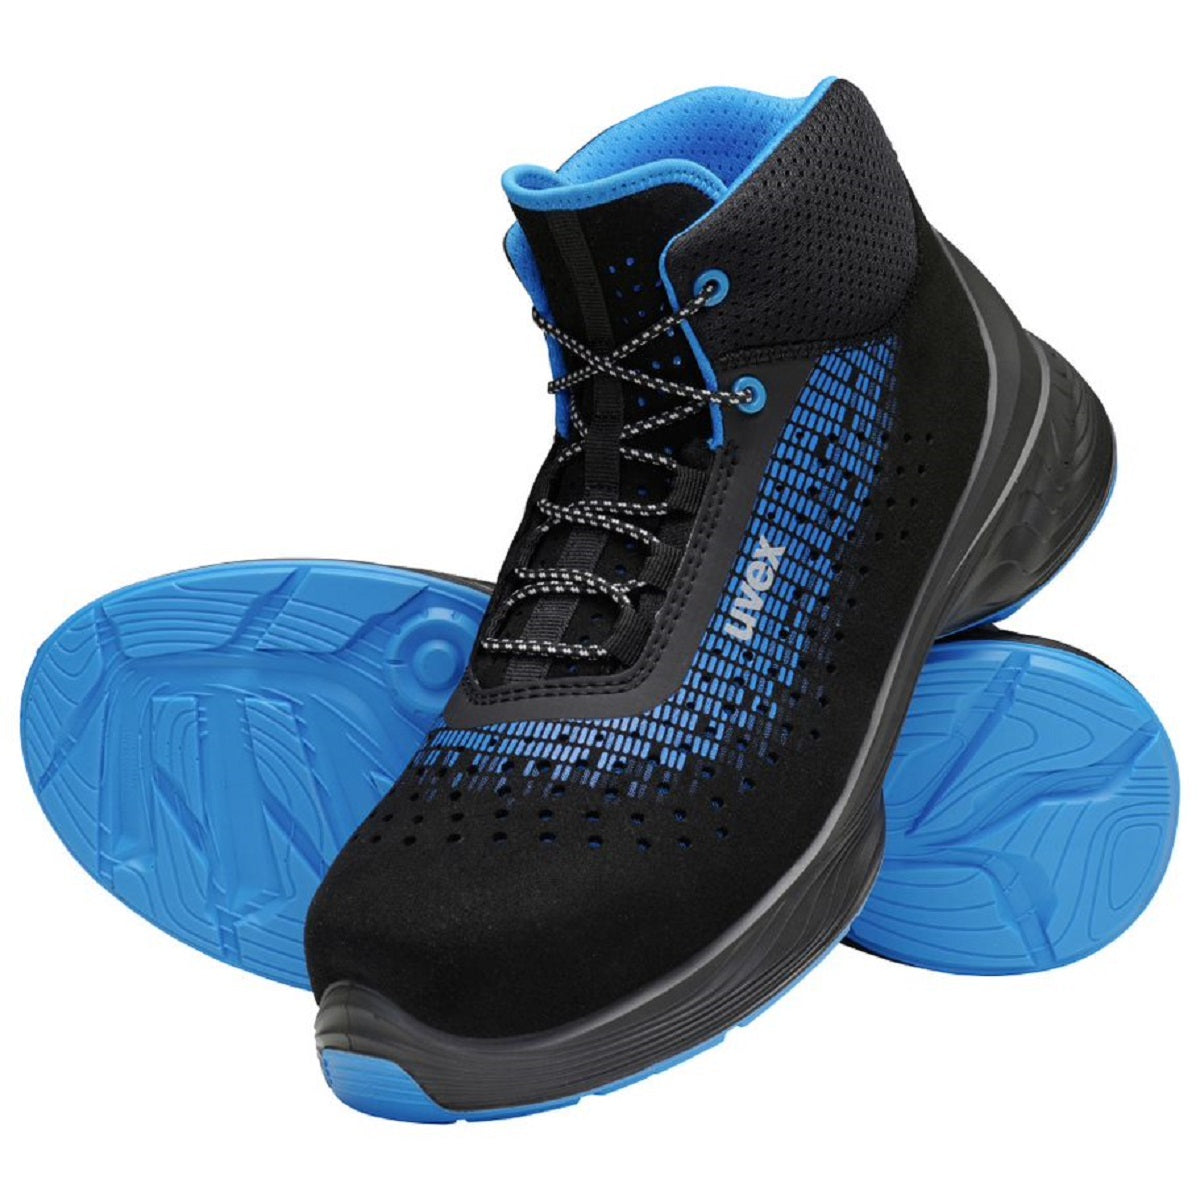 uvex 68381 G2 safety boots. Black Blue perforated microsuede ESD 100% Non-metal, metal-free, composite toe-cap. Comfortable uvex boots best deal at protexU